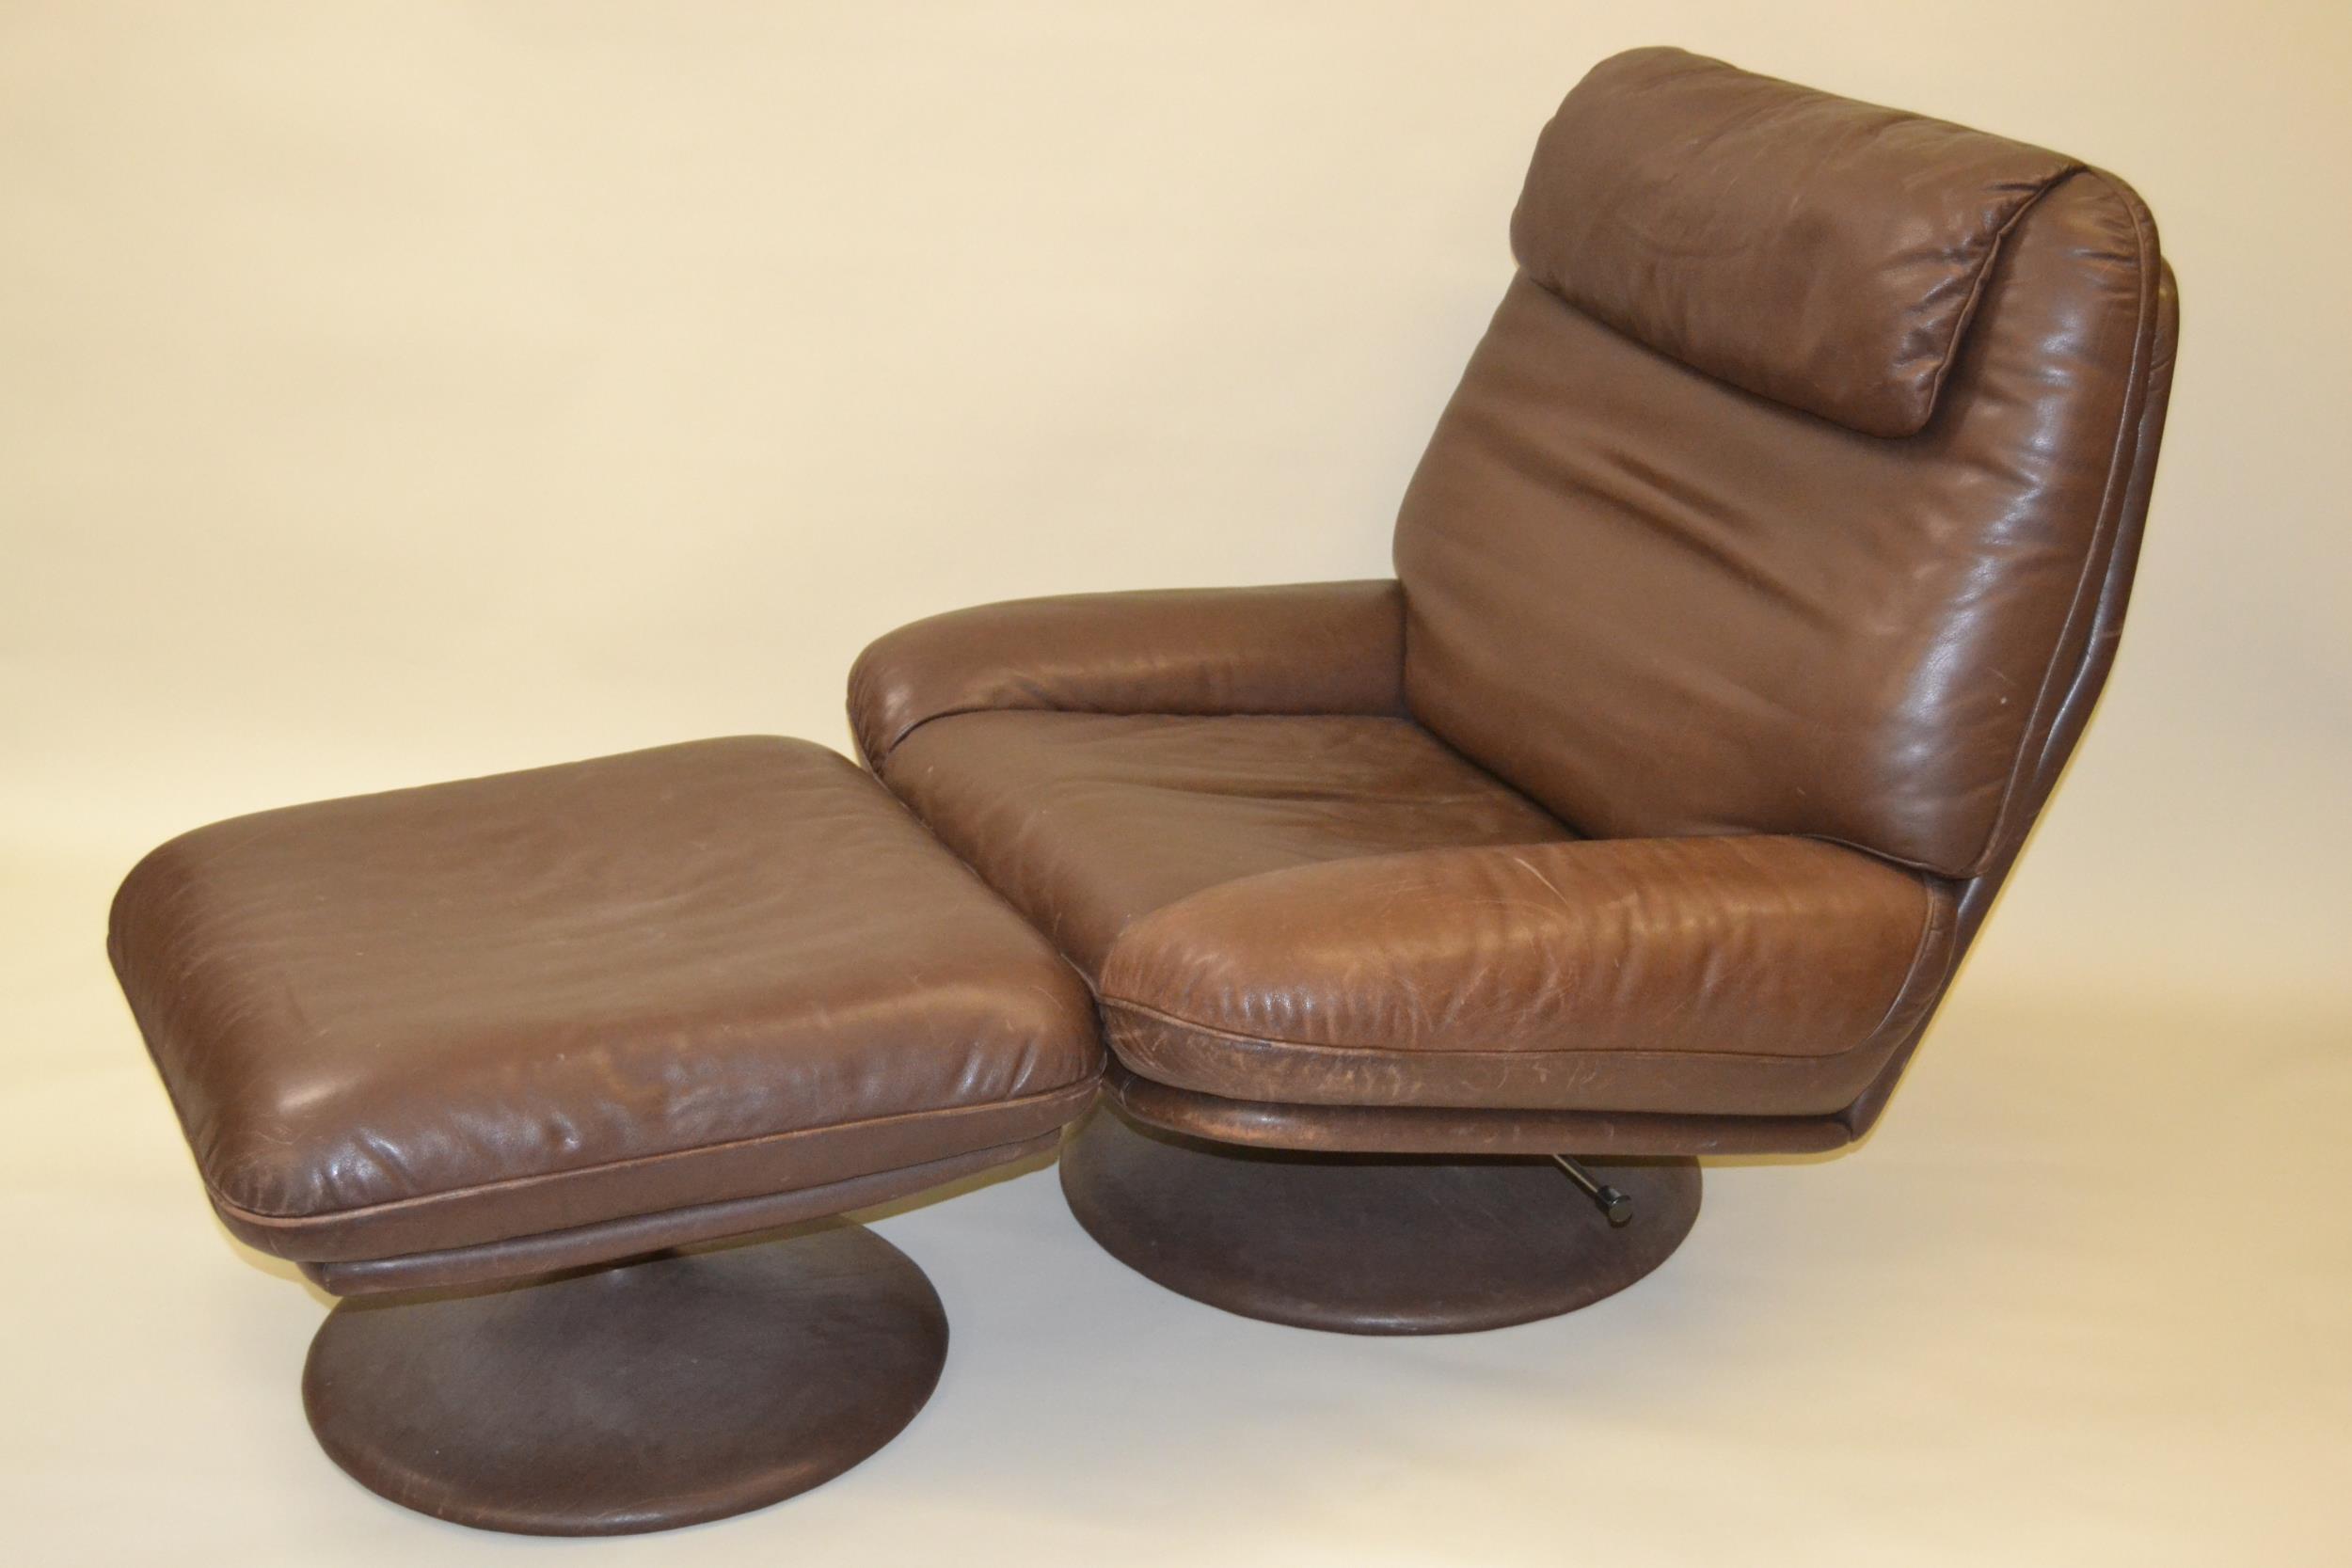 1970's De Sede dark tan leather swivel chair with matching stool